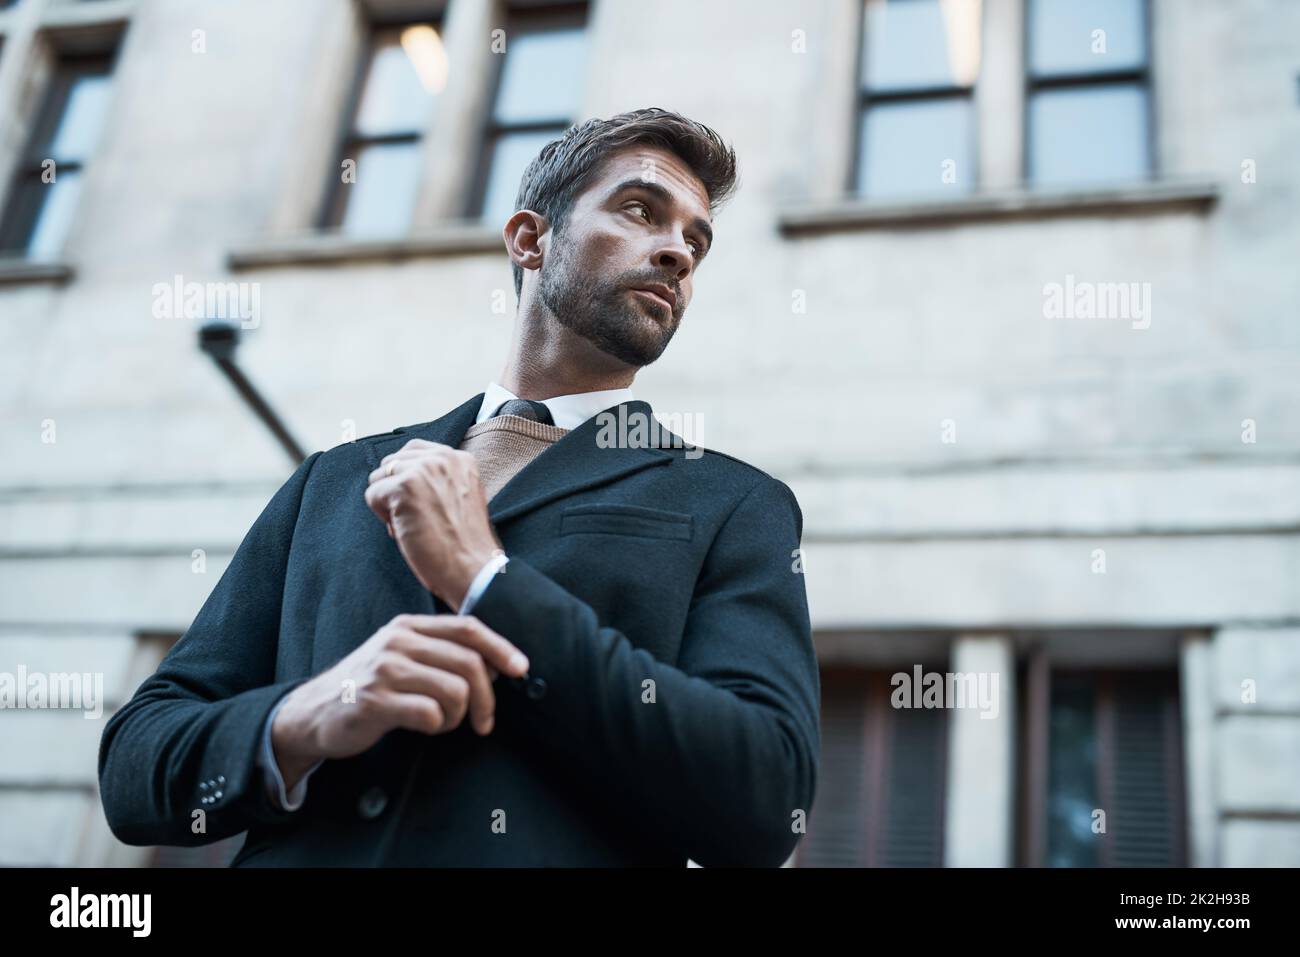 Dressed for success. Low angle shot of a handsome businessman about town. Stock Photo